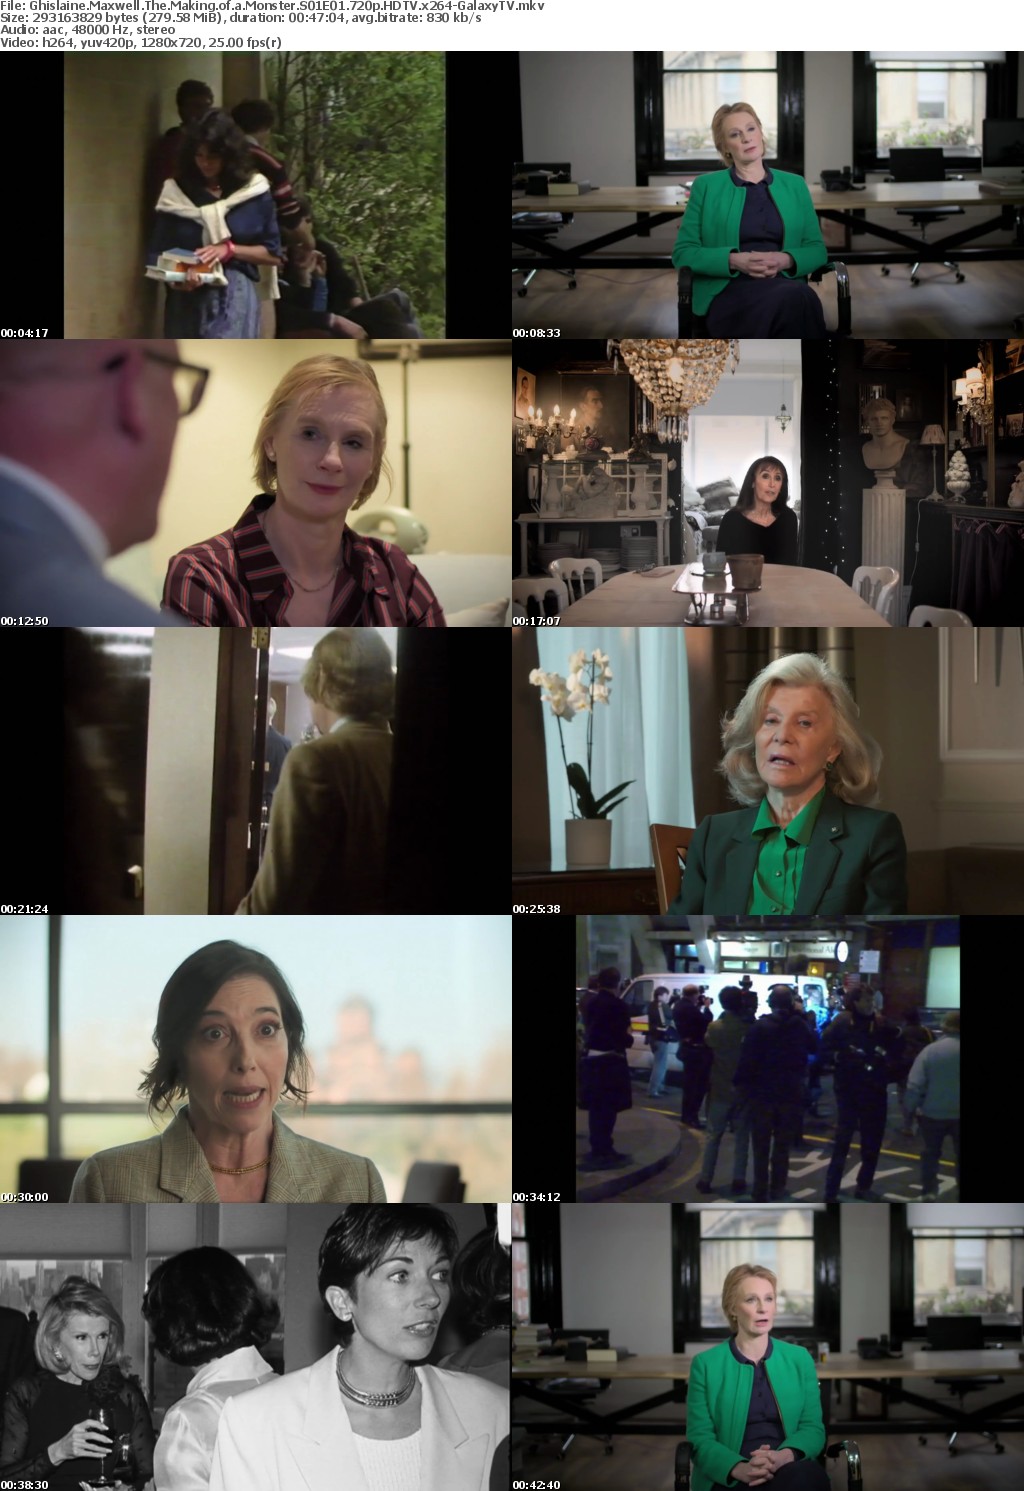 Ghislaine Maxwell The Making of a Monster S01 COMPLETE 720p HDTV x264-GalaxyTV